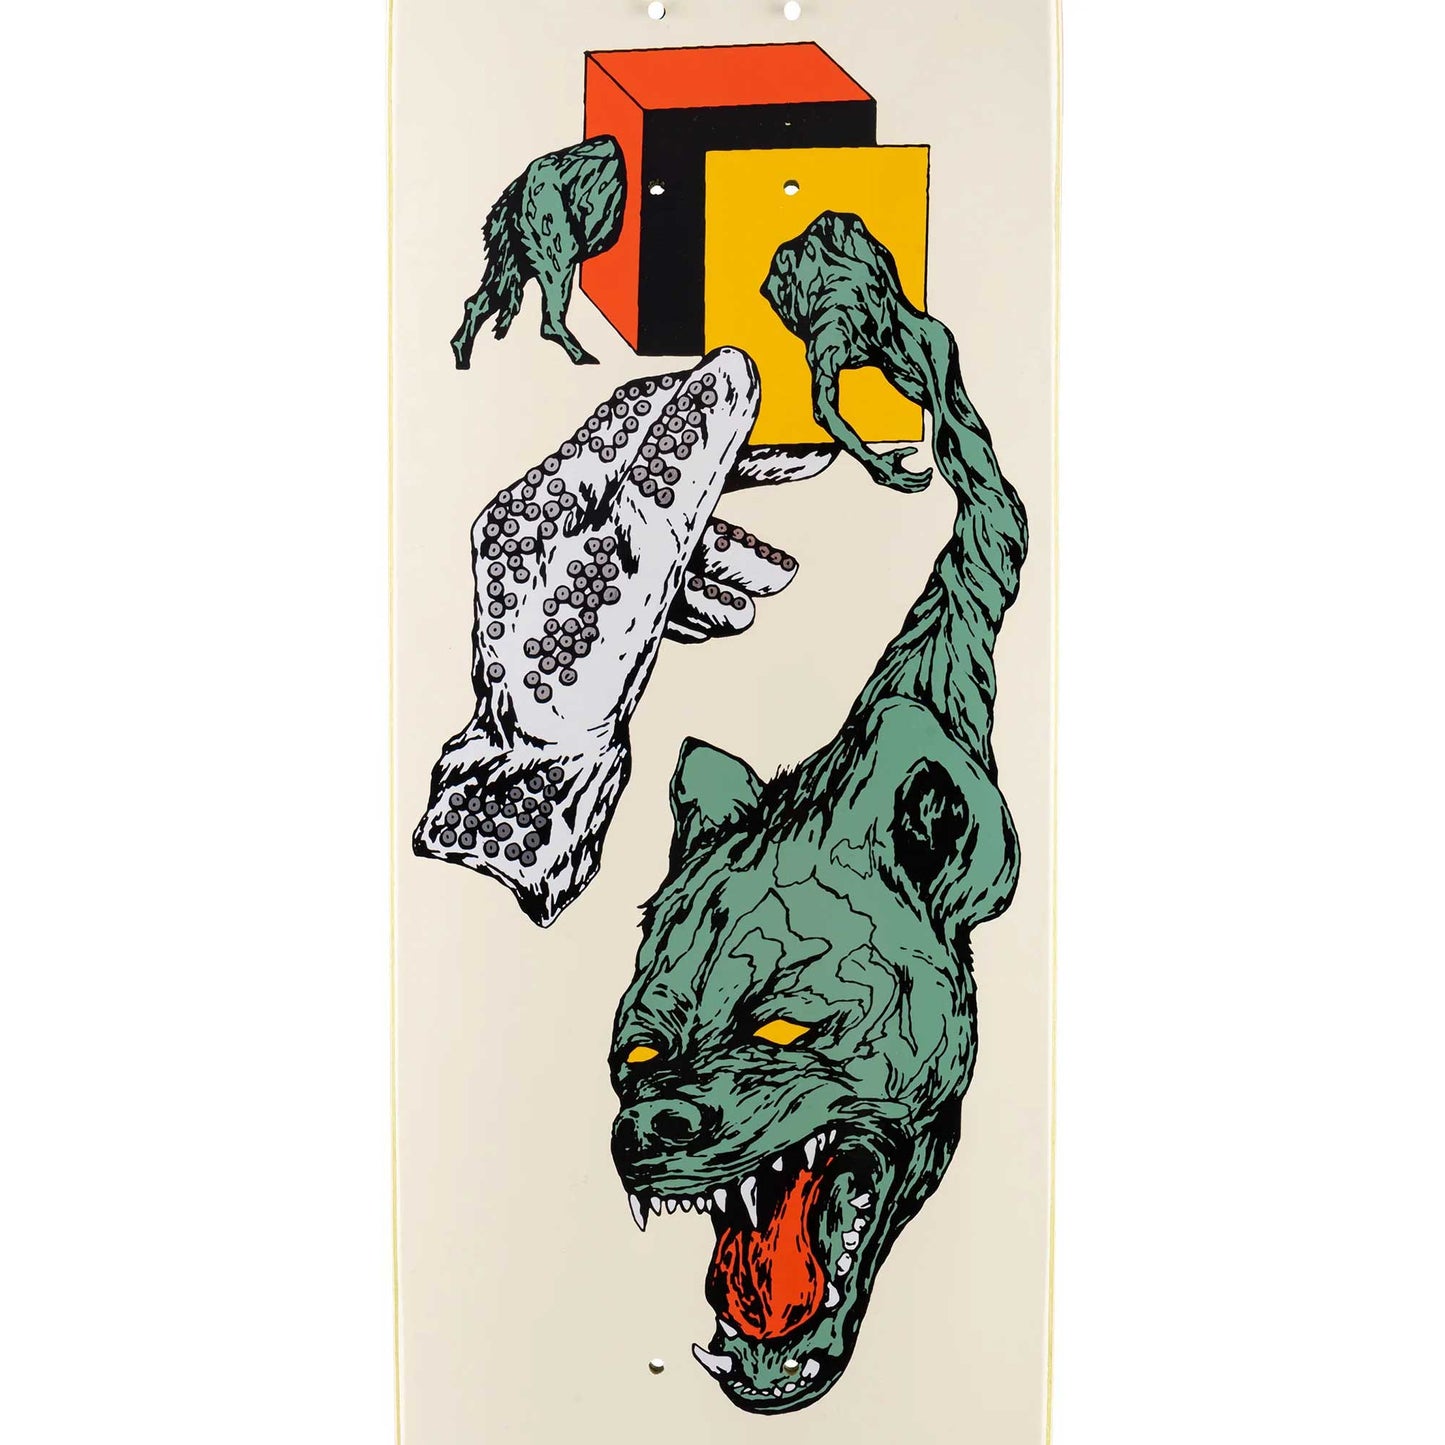 Welcome Face Of A Lover Son Of Moontrimmerdeck (8.25") - Tiki Room Skateboards - 3